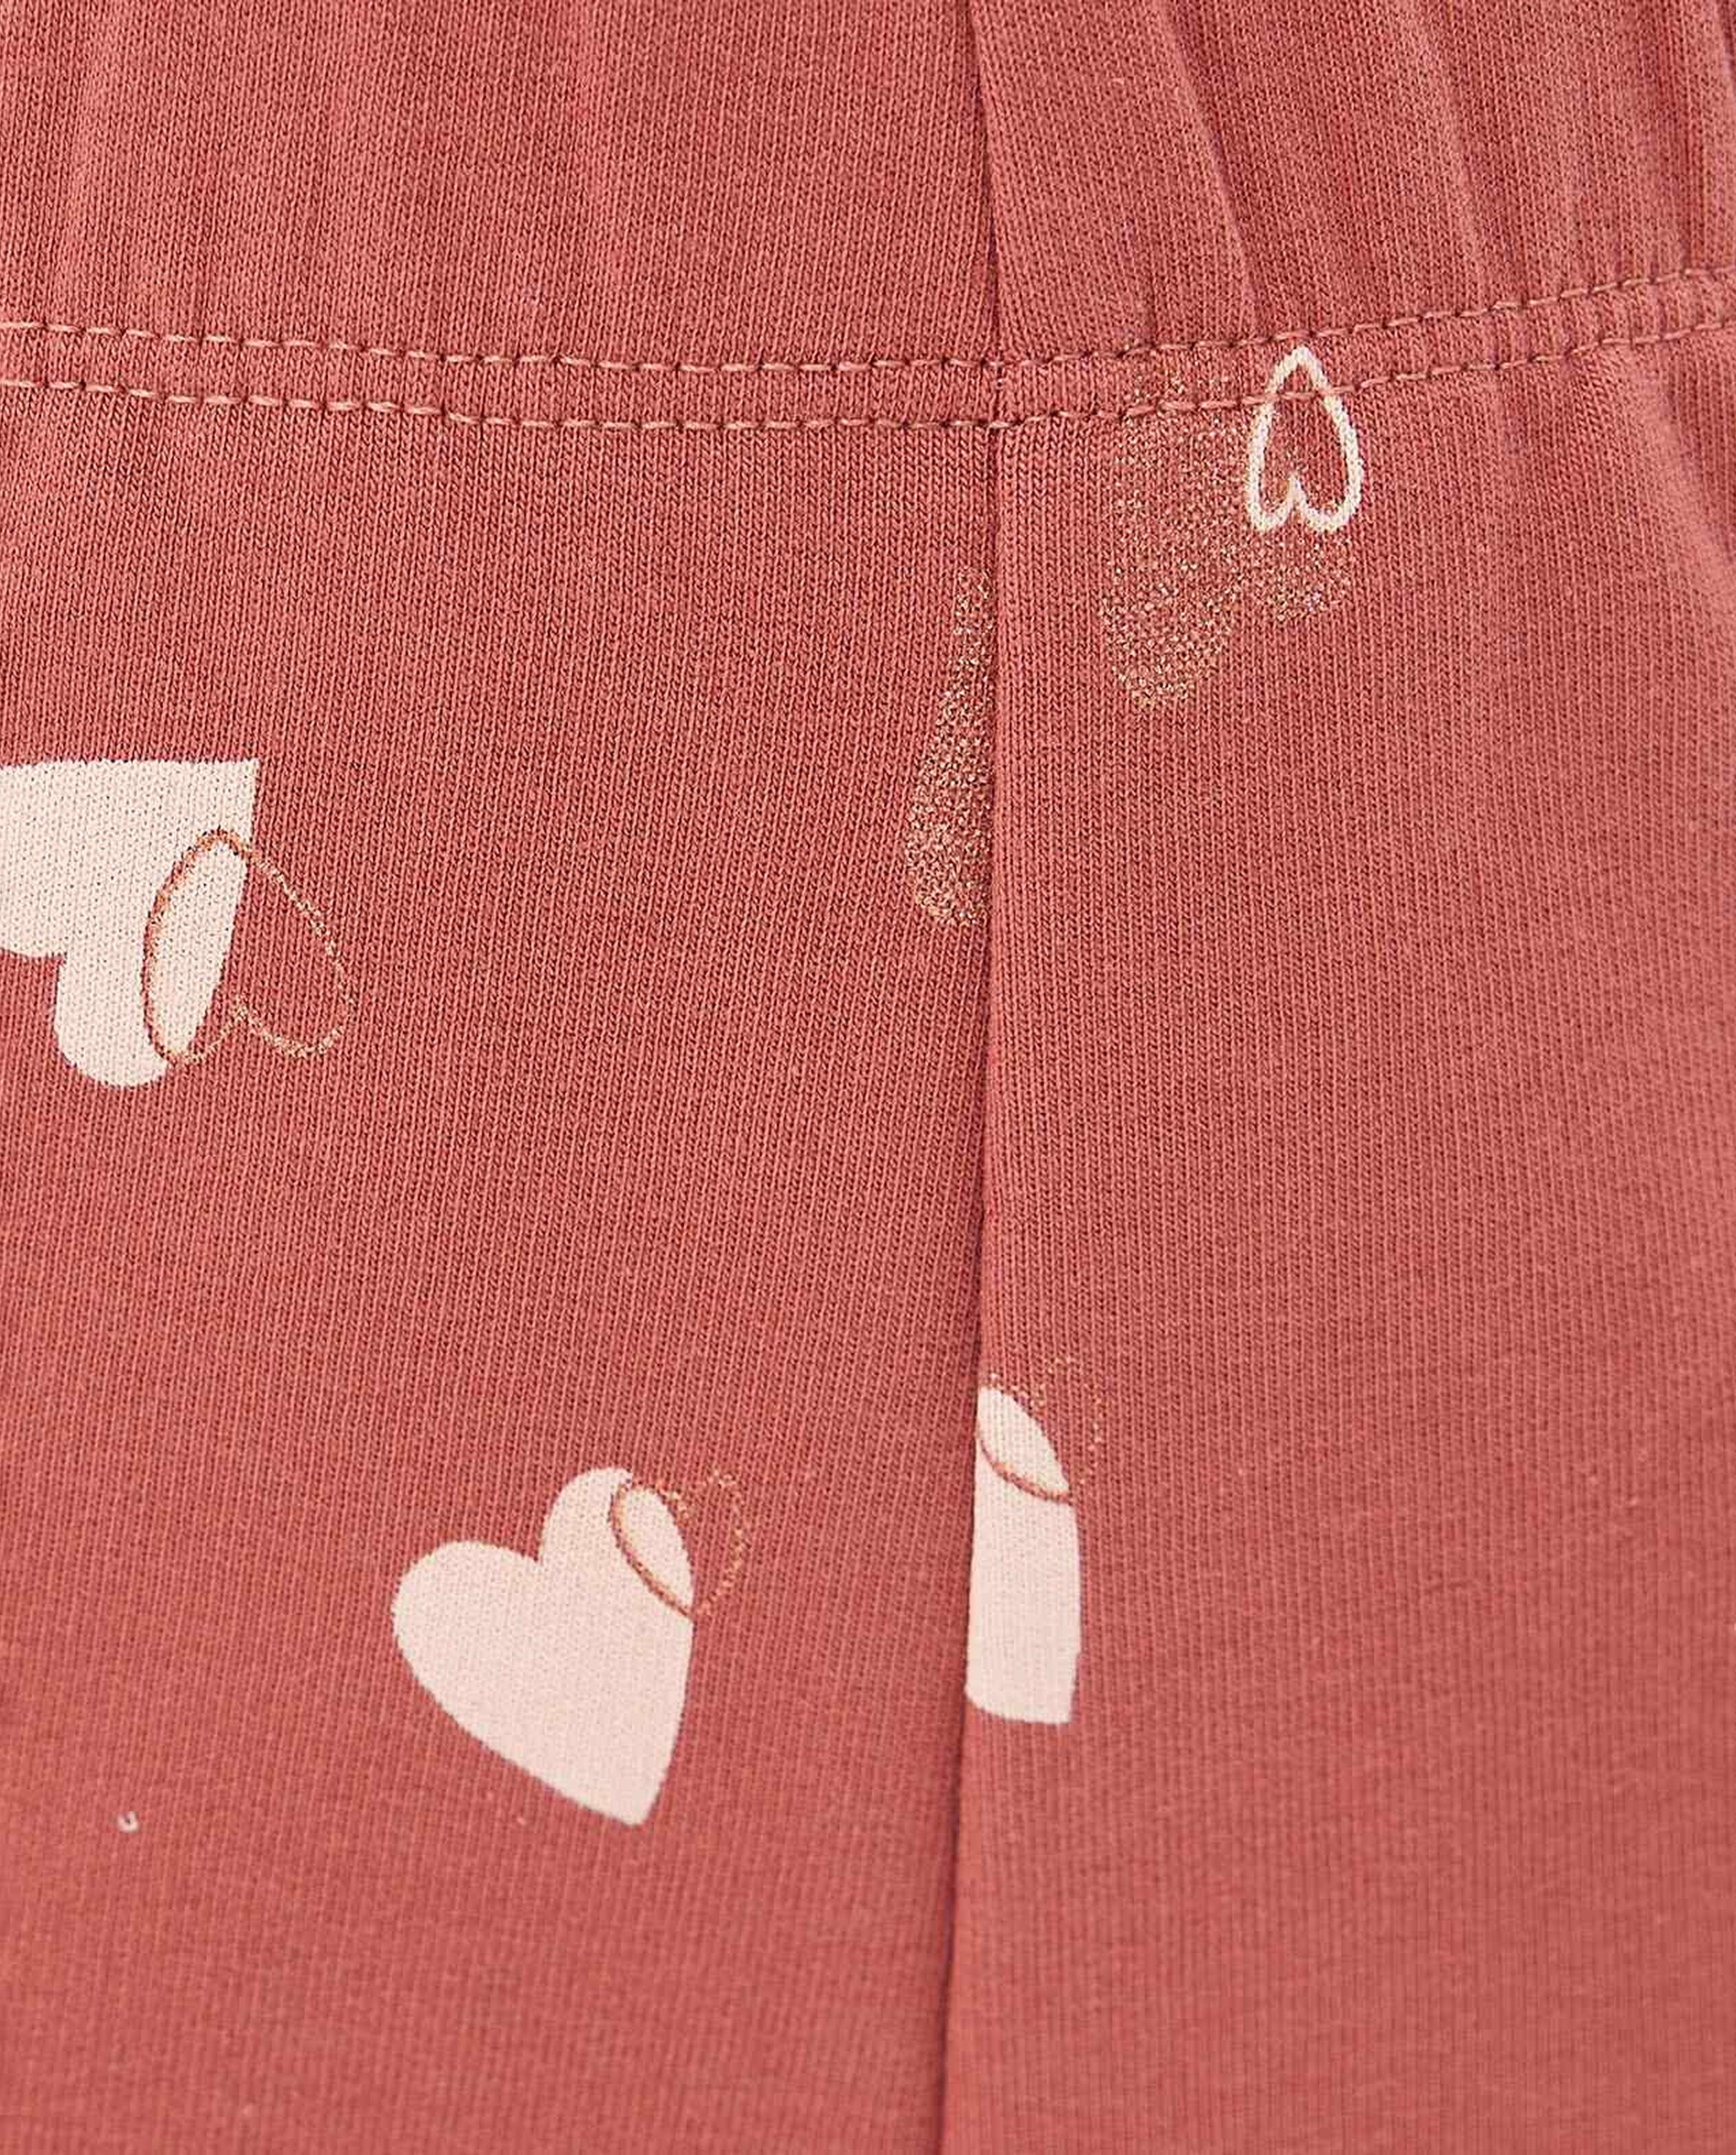 Heart Patterned Flared Knit Pants with Elastic Waist